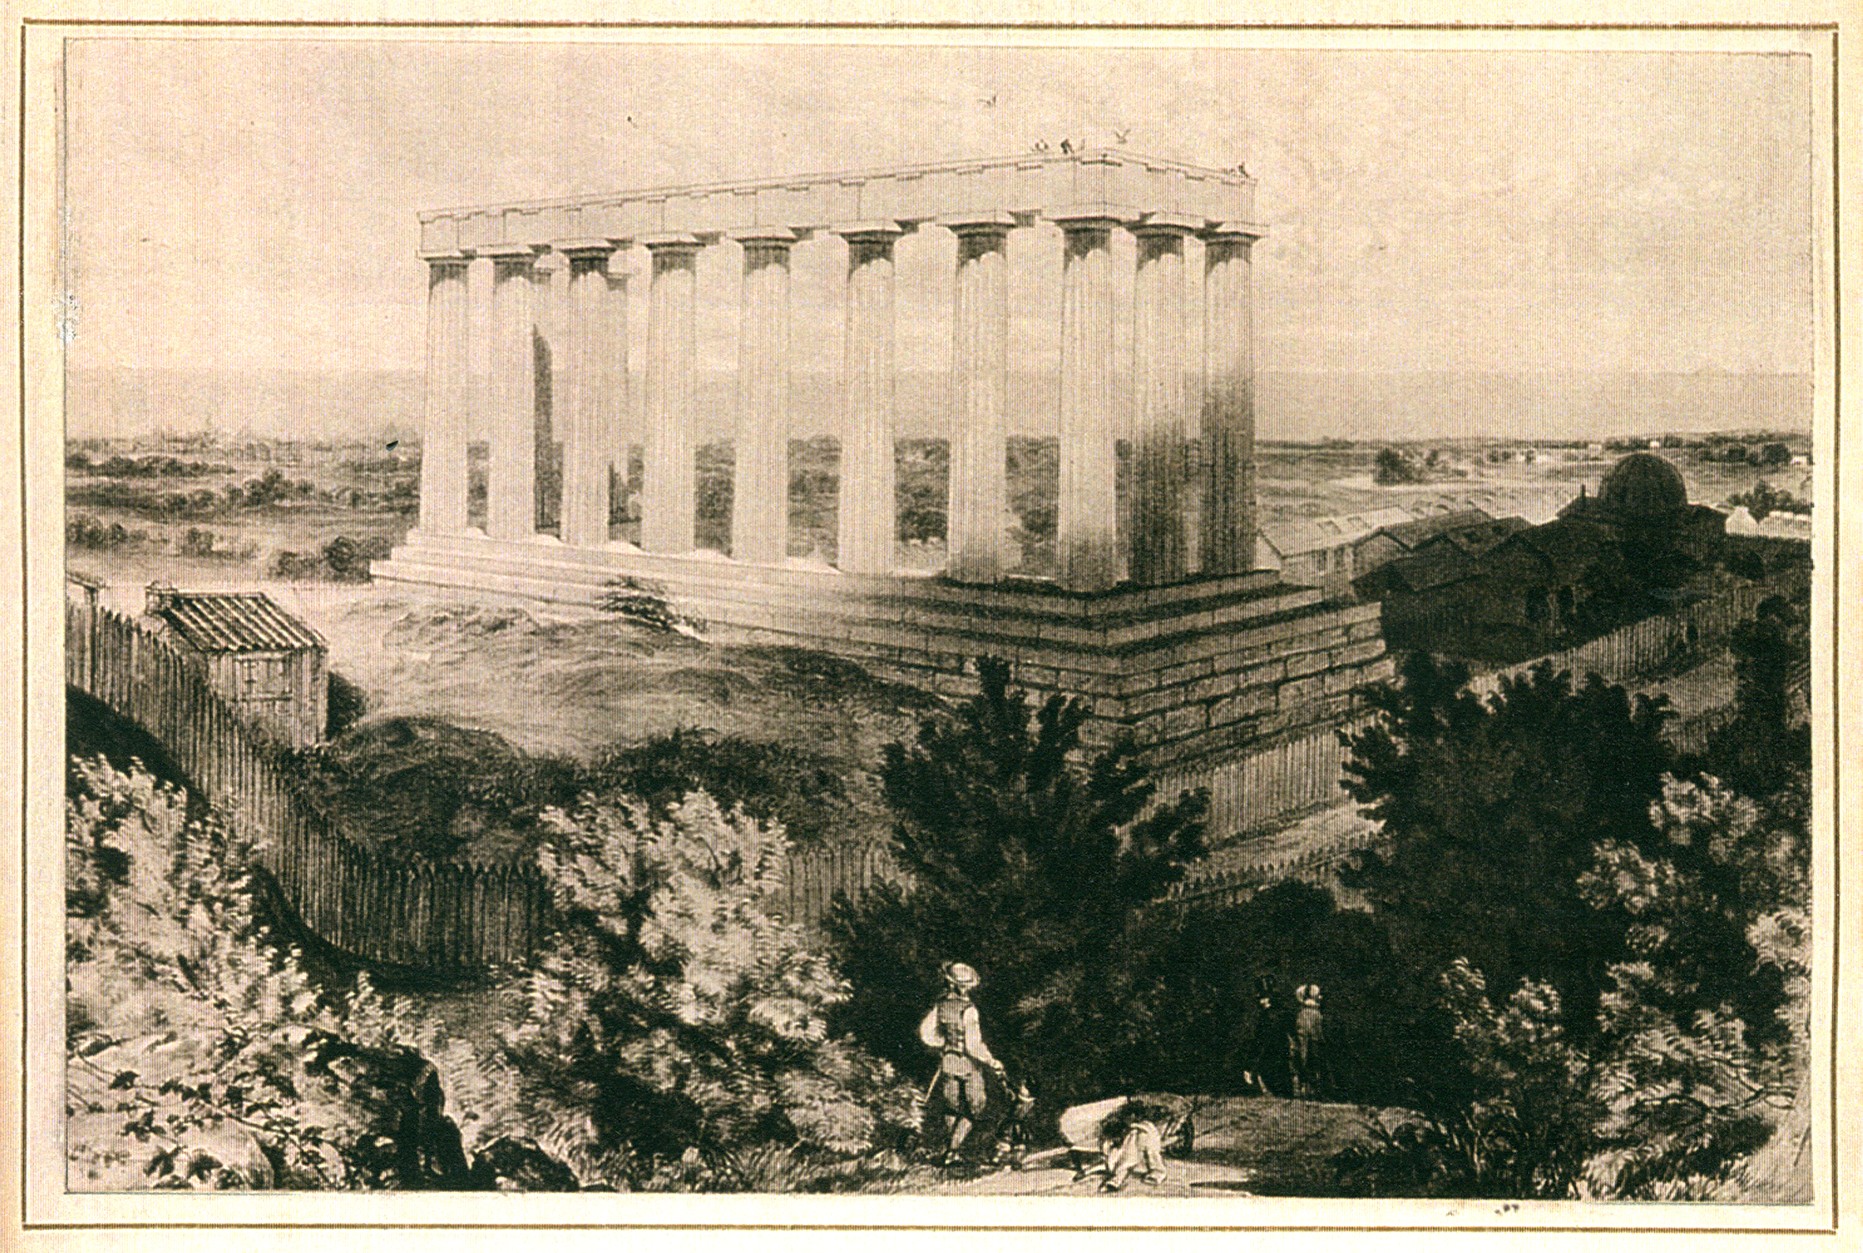 Early 19th century sketch of the unfinished monument atop Carlton Hill